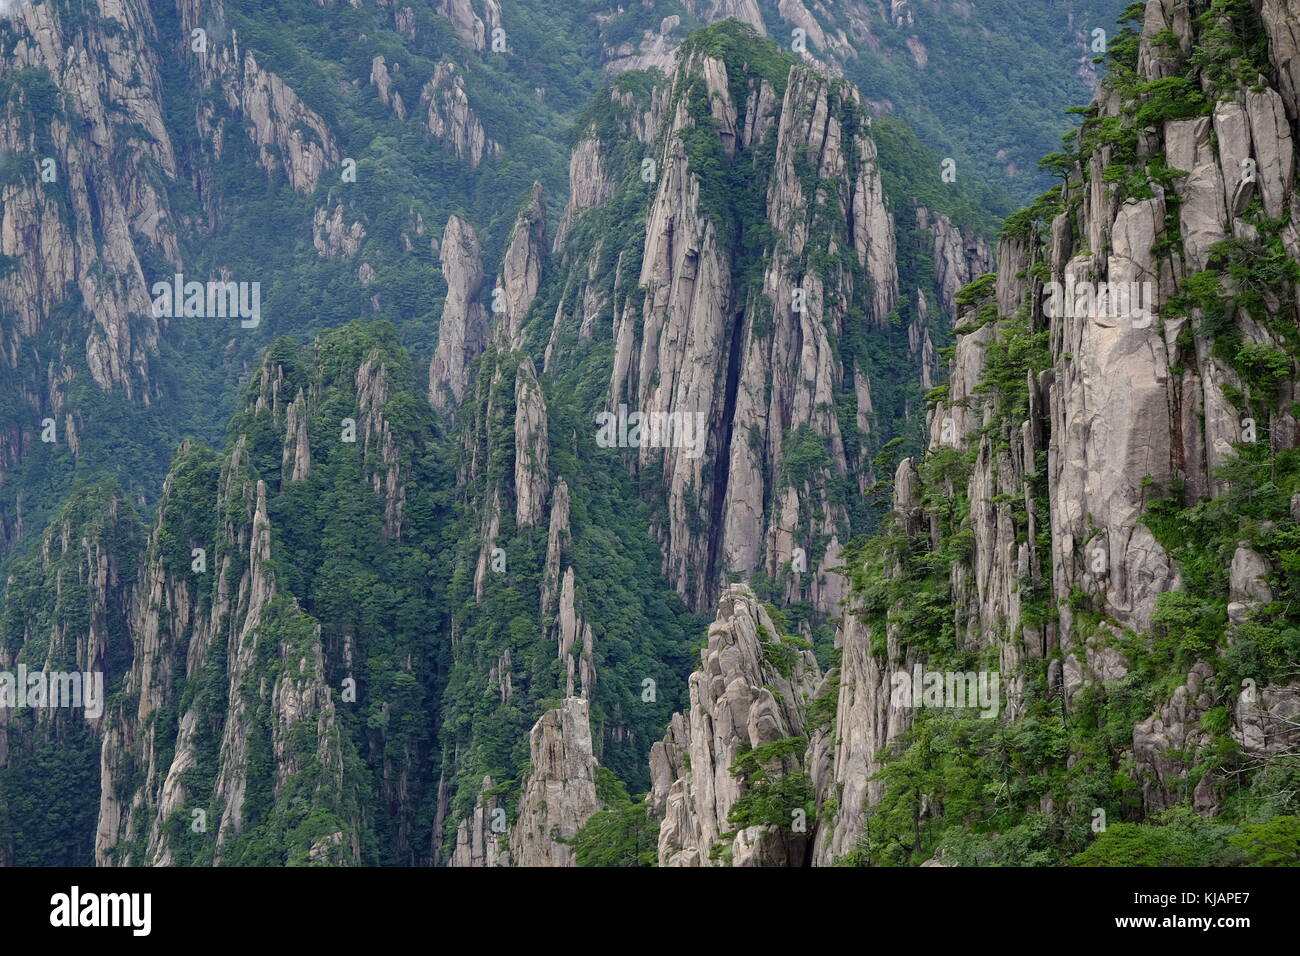 Rugged granite walls of Huangshan mountain covered by pine tree forests in the province of Anhui at China Stock Photo